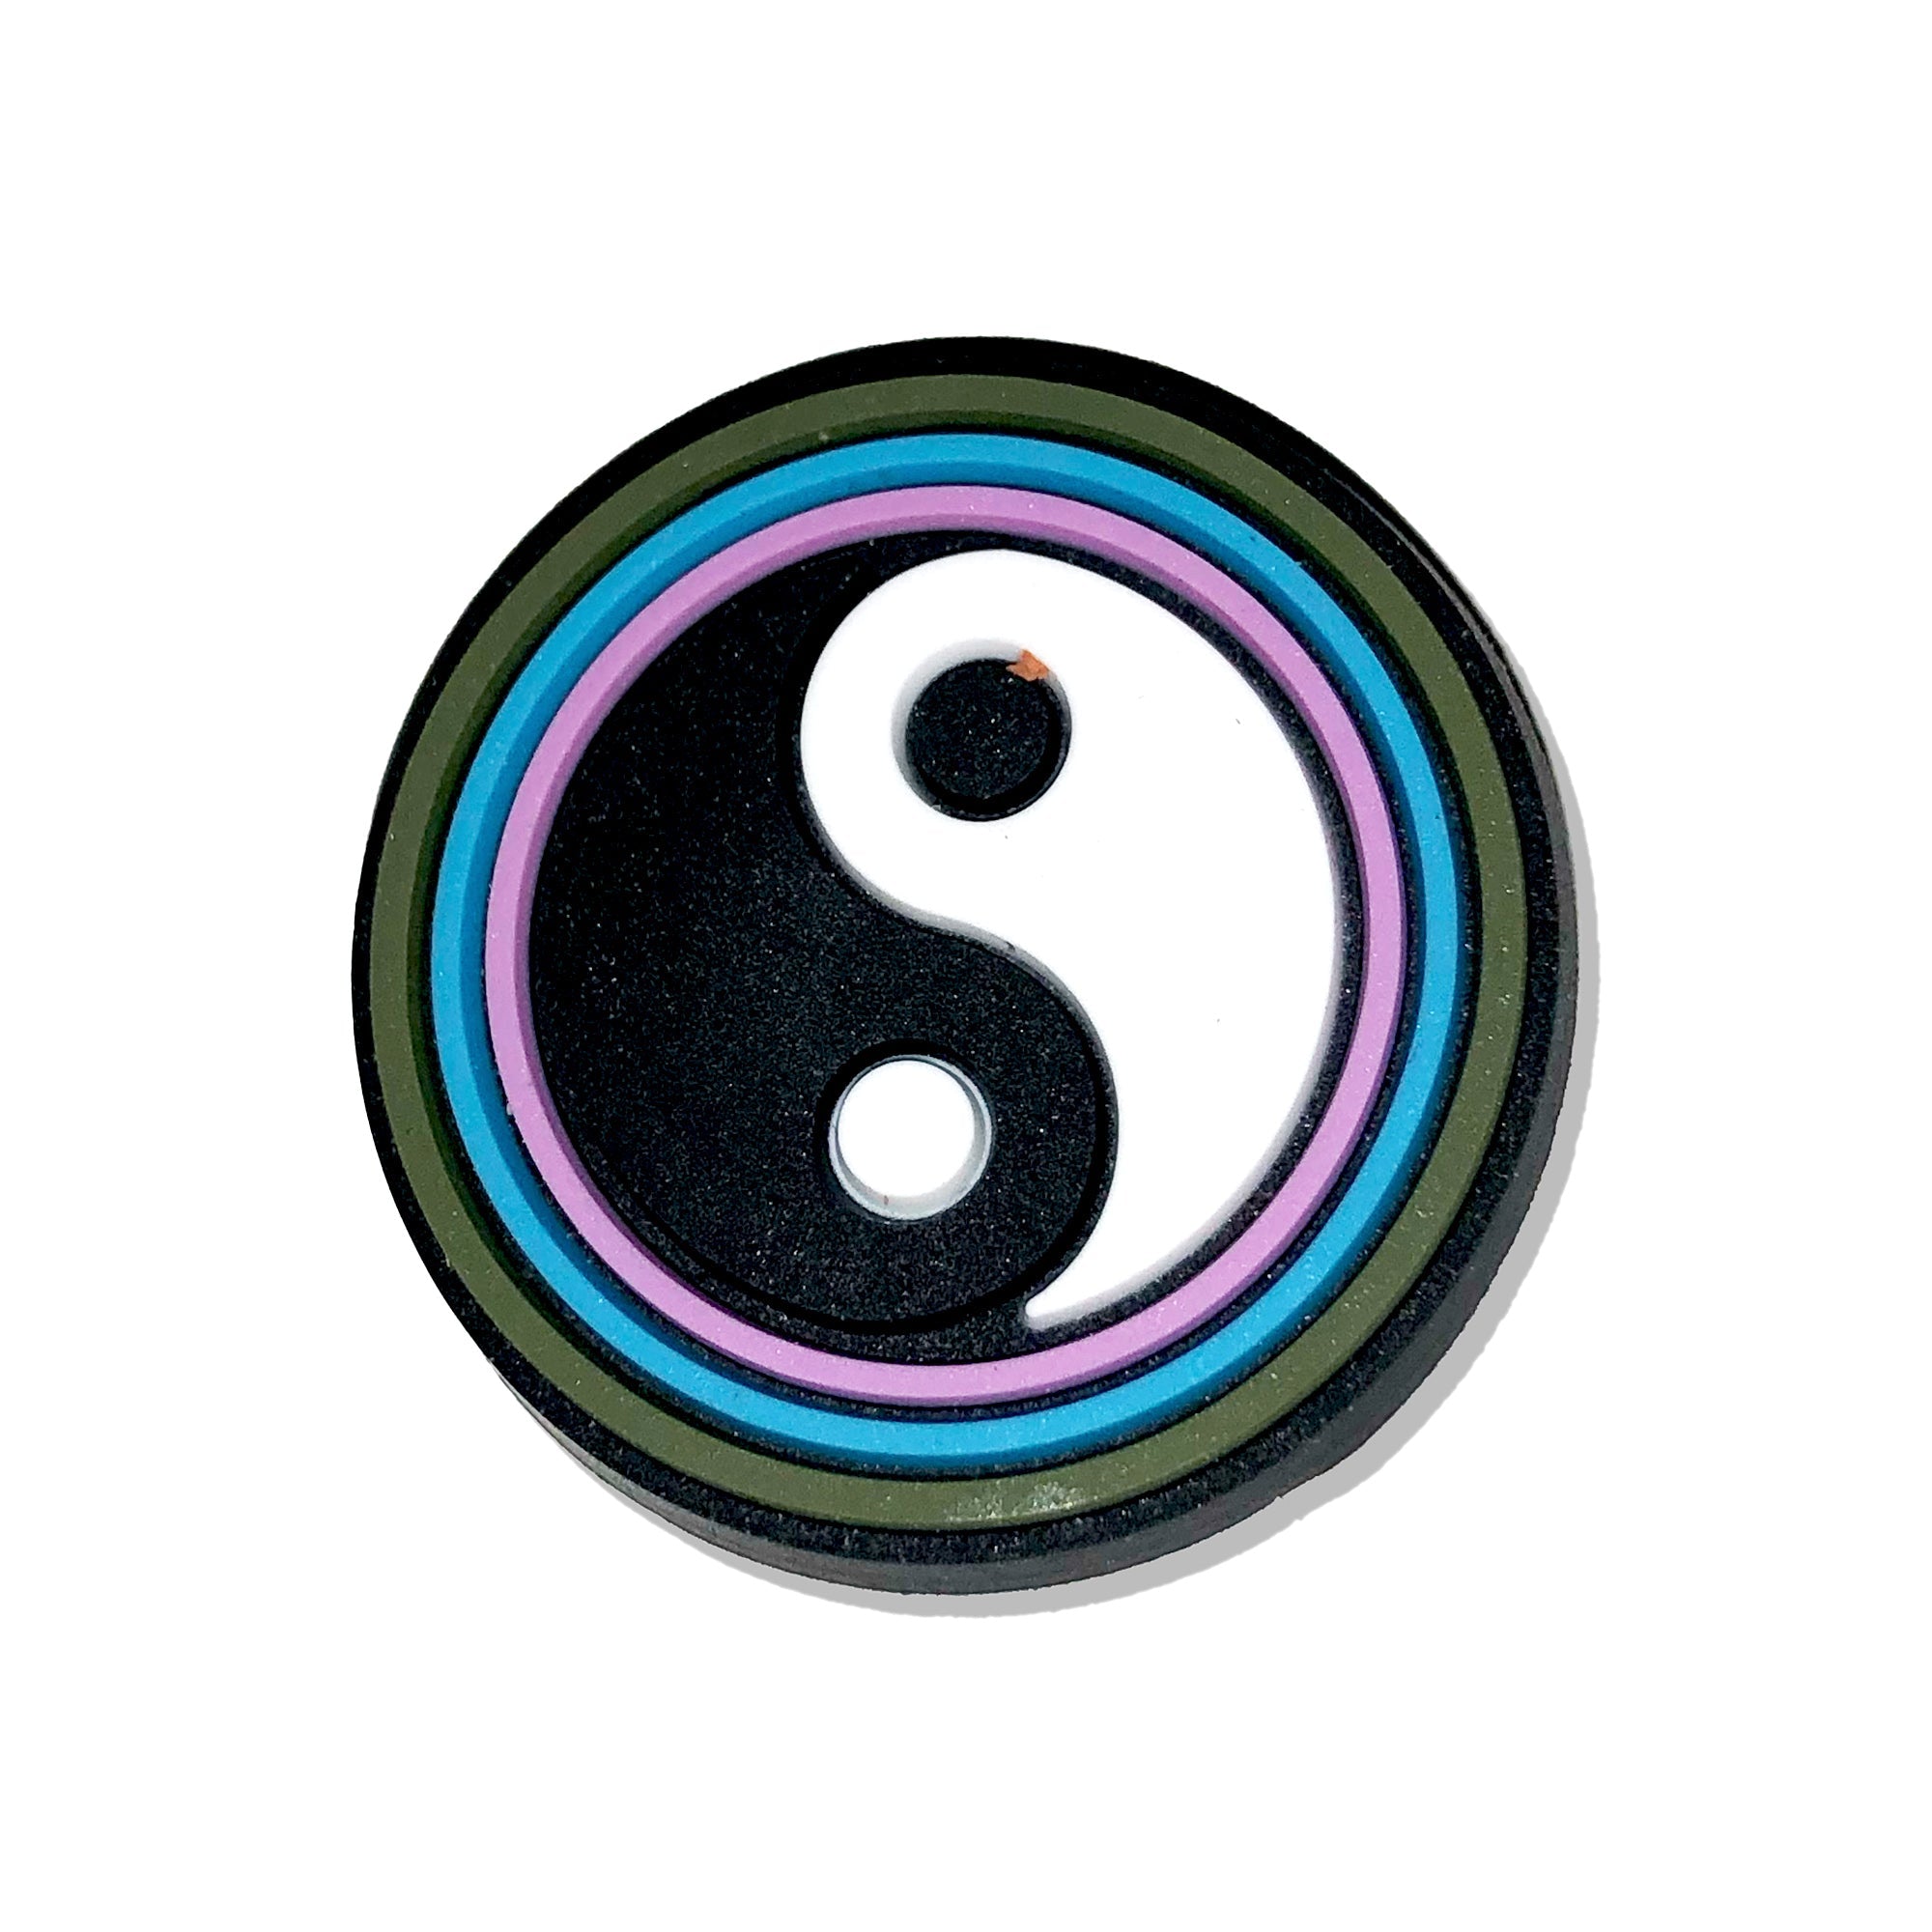 Yin Yang Shoe Charm: Find Balance in Style ☯️ - Questsole